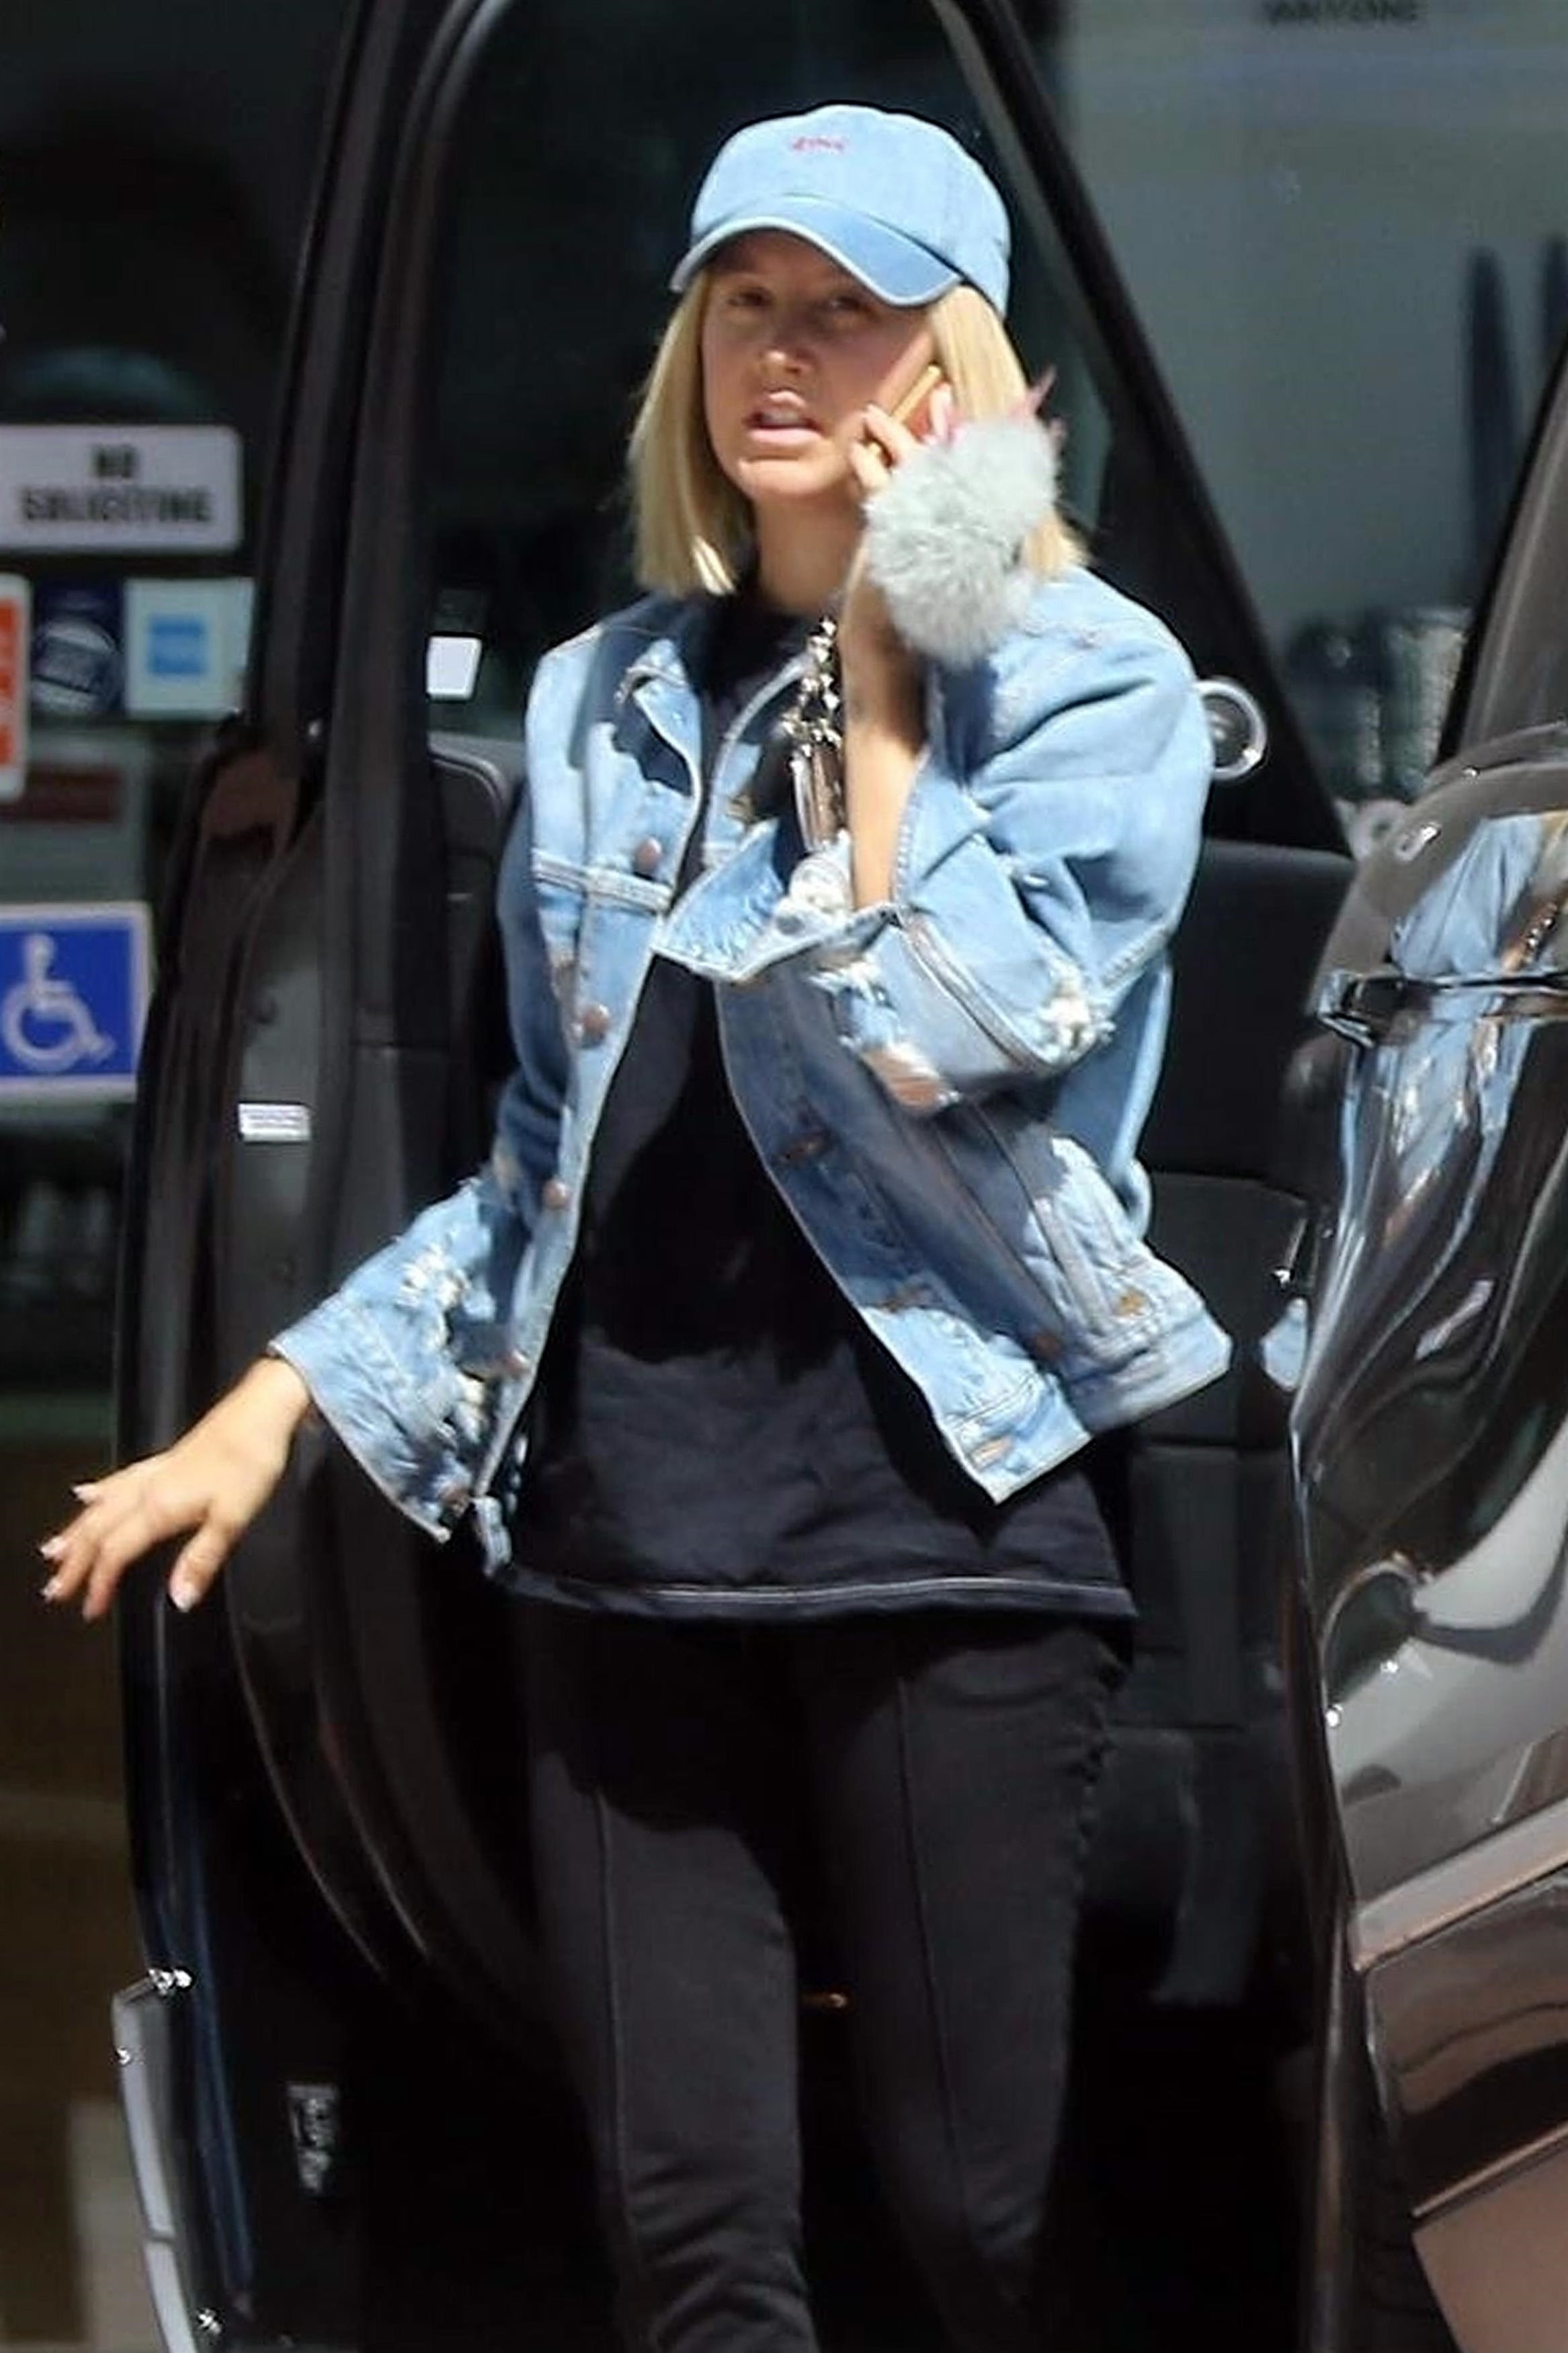 ashley-tisdale-going-to-a-nail-salon-in-studio-city-92218-2.jpg